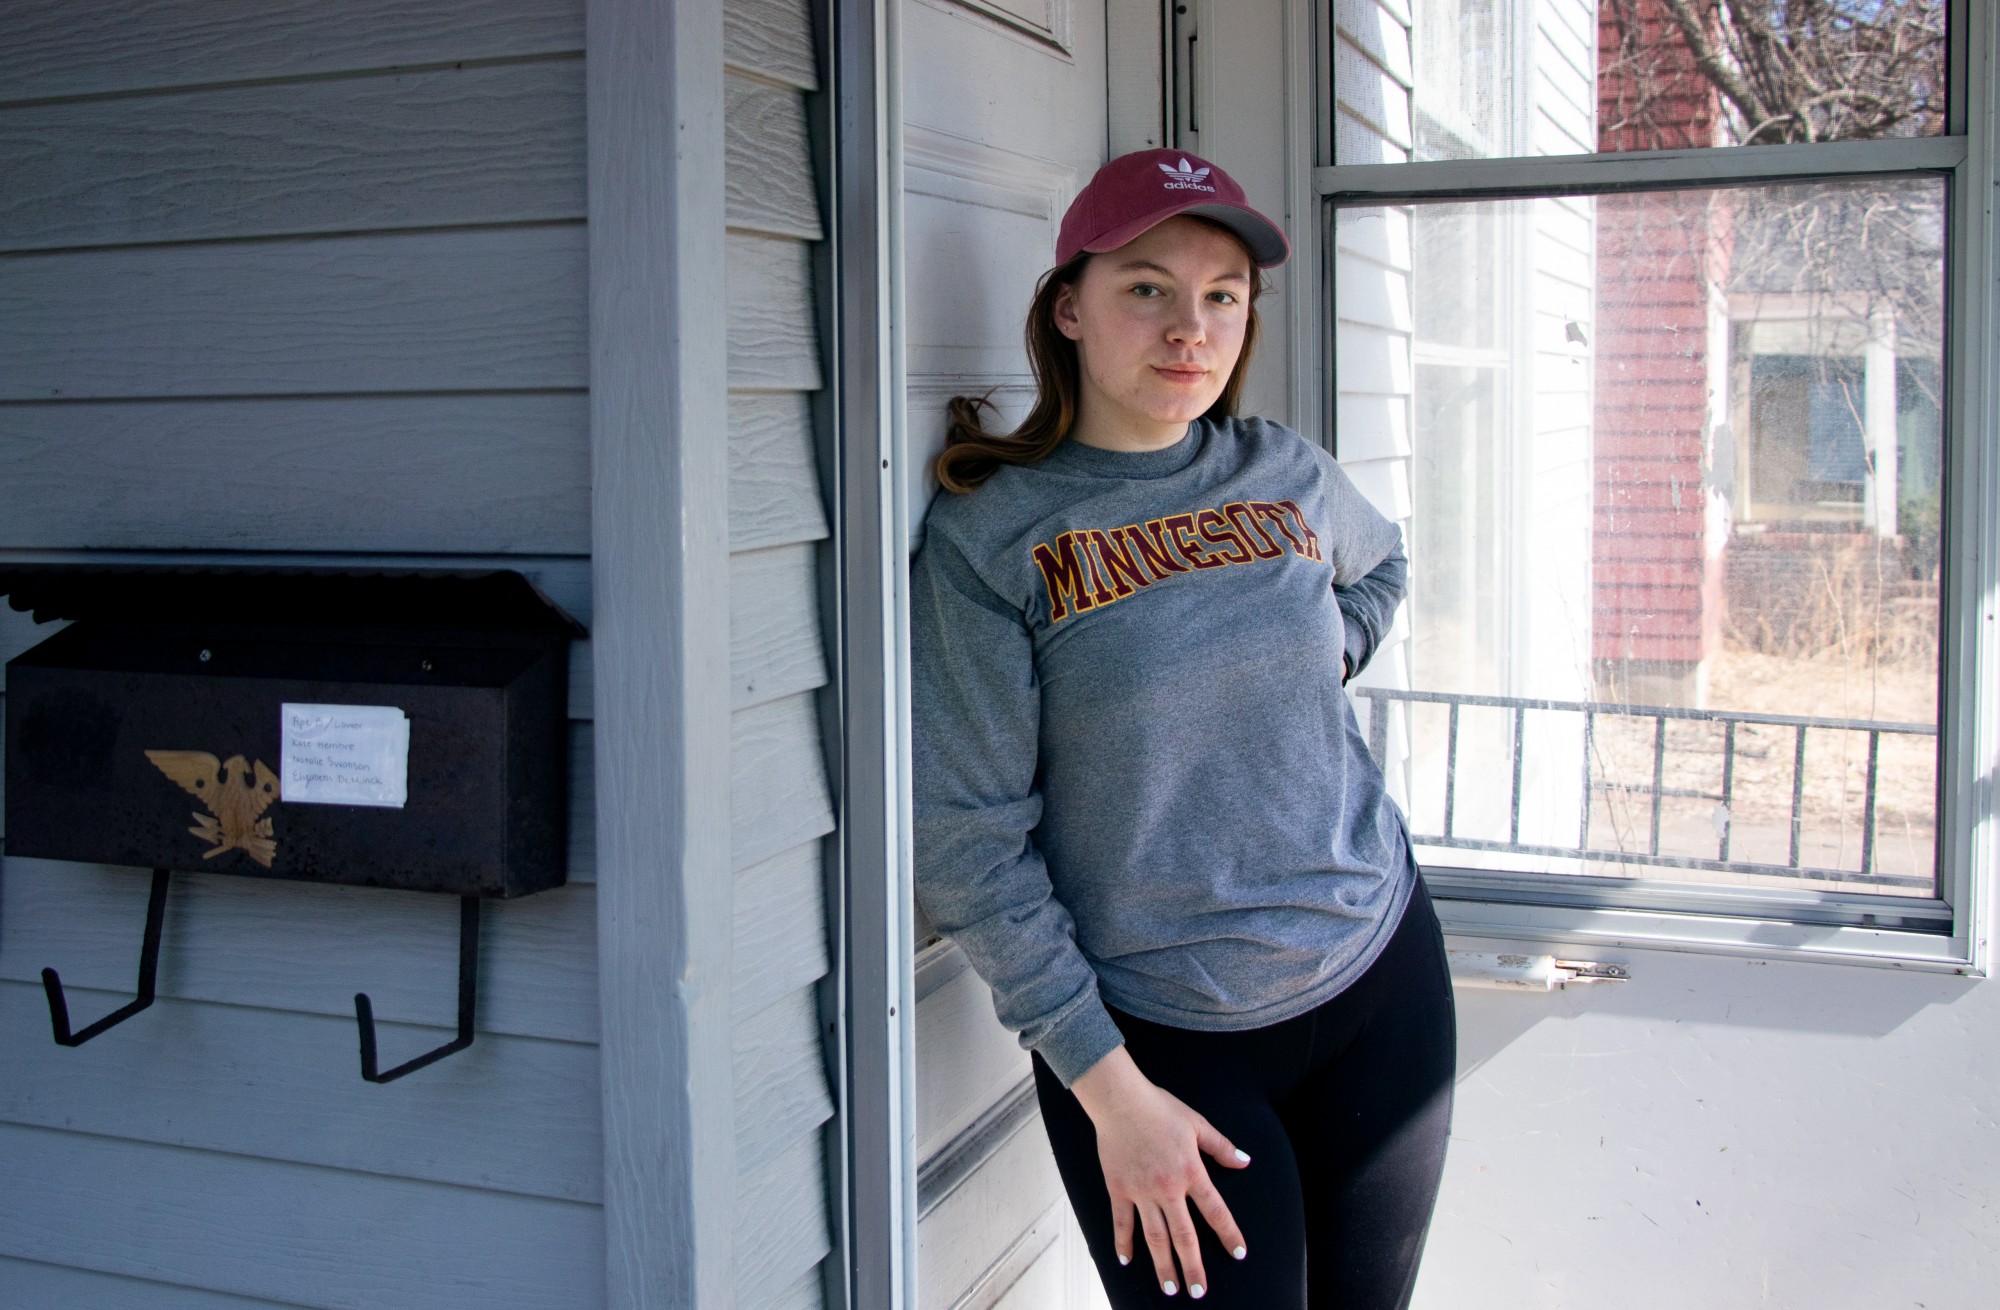 Third-year student Natalie Swanson poses for a portrait at the house she rents in Marcy-Holmes on Wednesday, April 1. Swanson was laid off from her job at a coffee shop that stopped operation in response to COVID-19. Though her landlord has lowered rent by $100 per person, she is uncertain about her ability to make rent after April. 